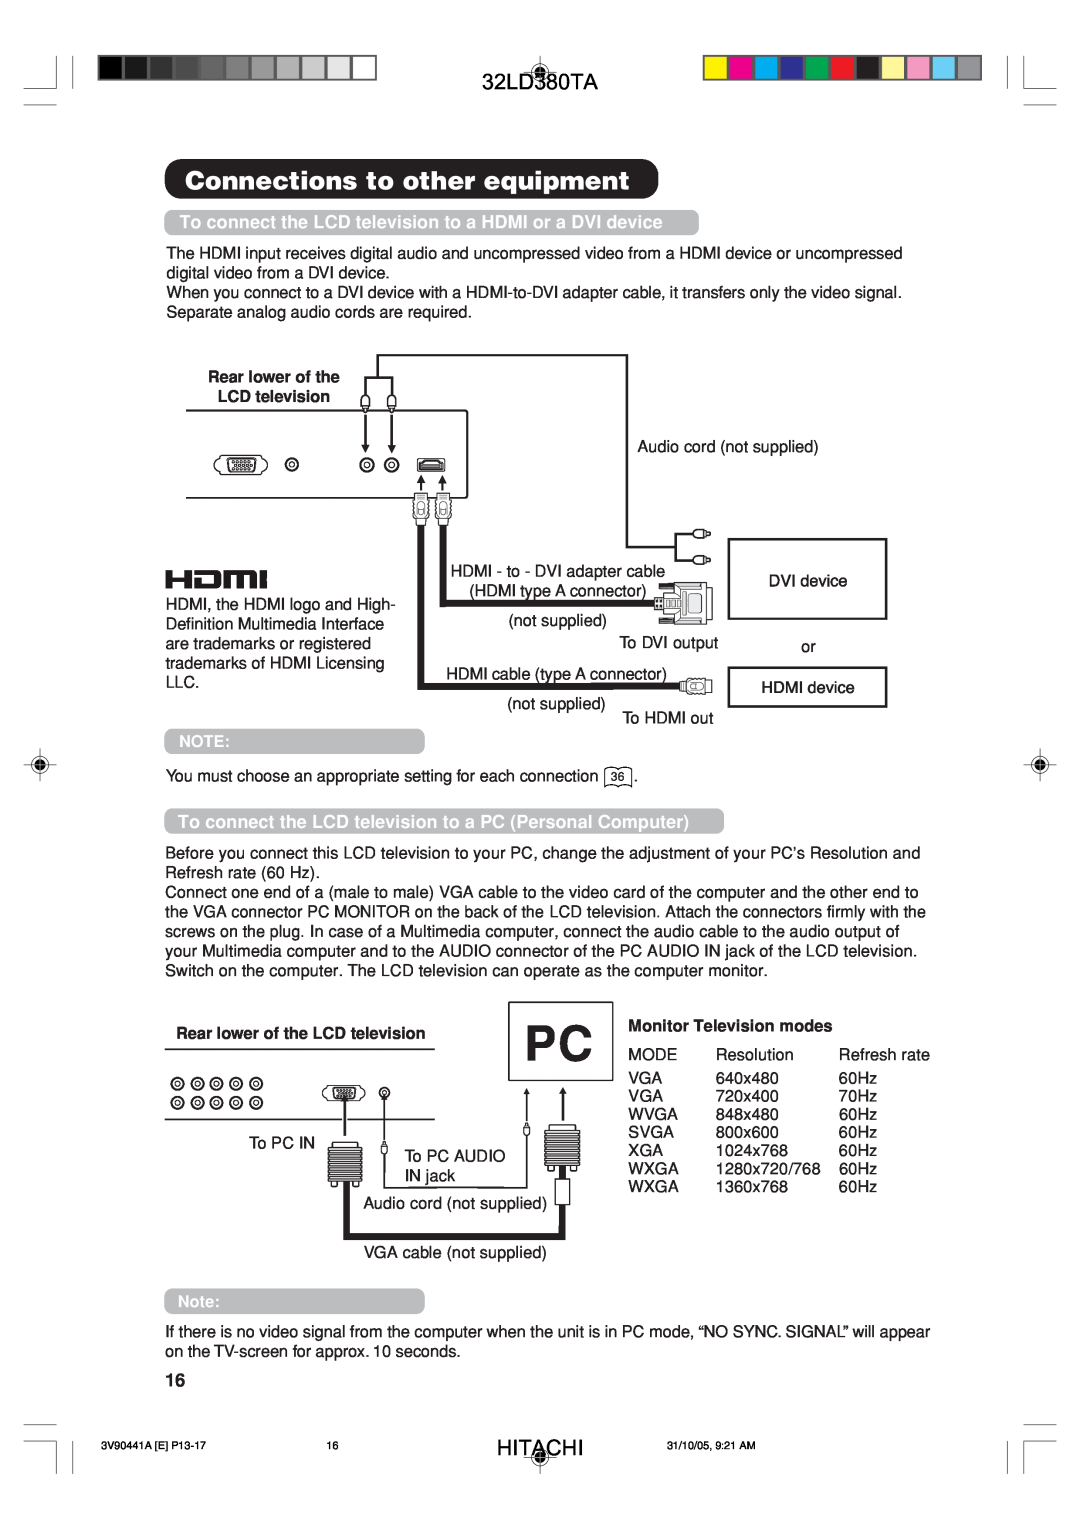 Hitachi 32LD380TA user manual To connect the LCD television to a HDMI or a DVI device, Monitor Television modes, Hitachi 